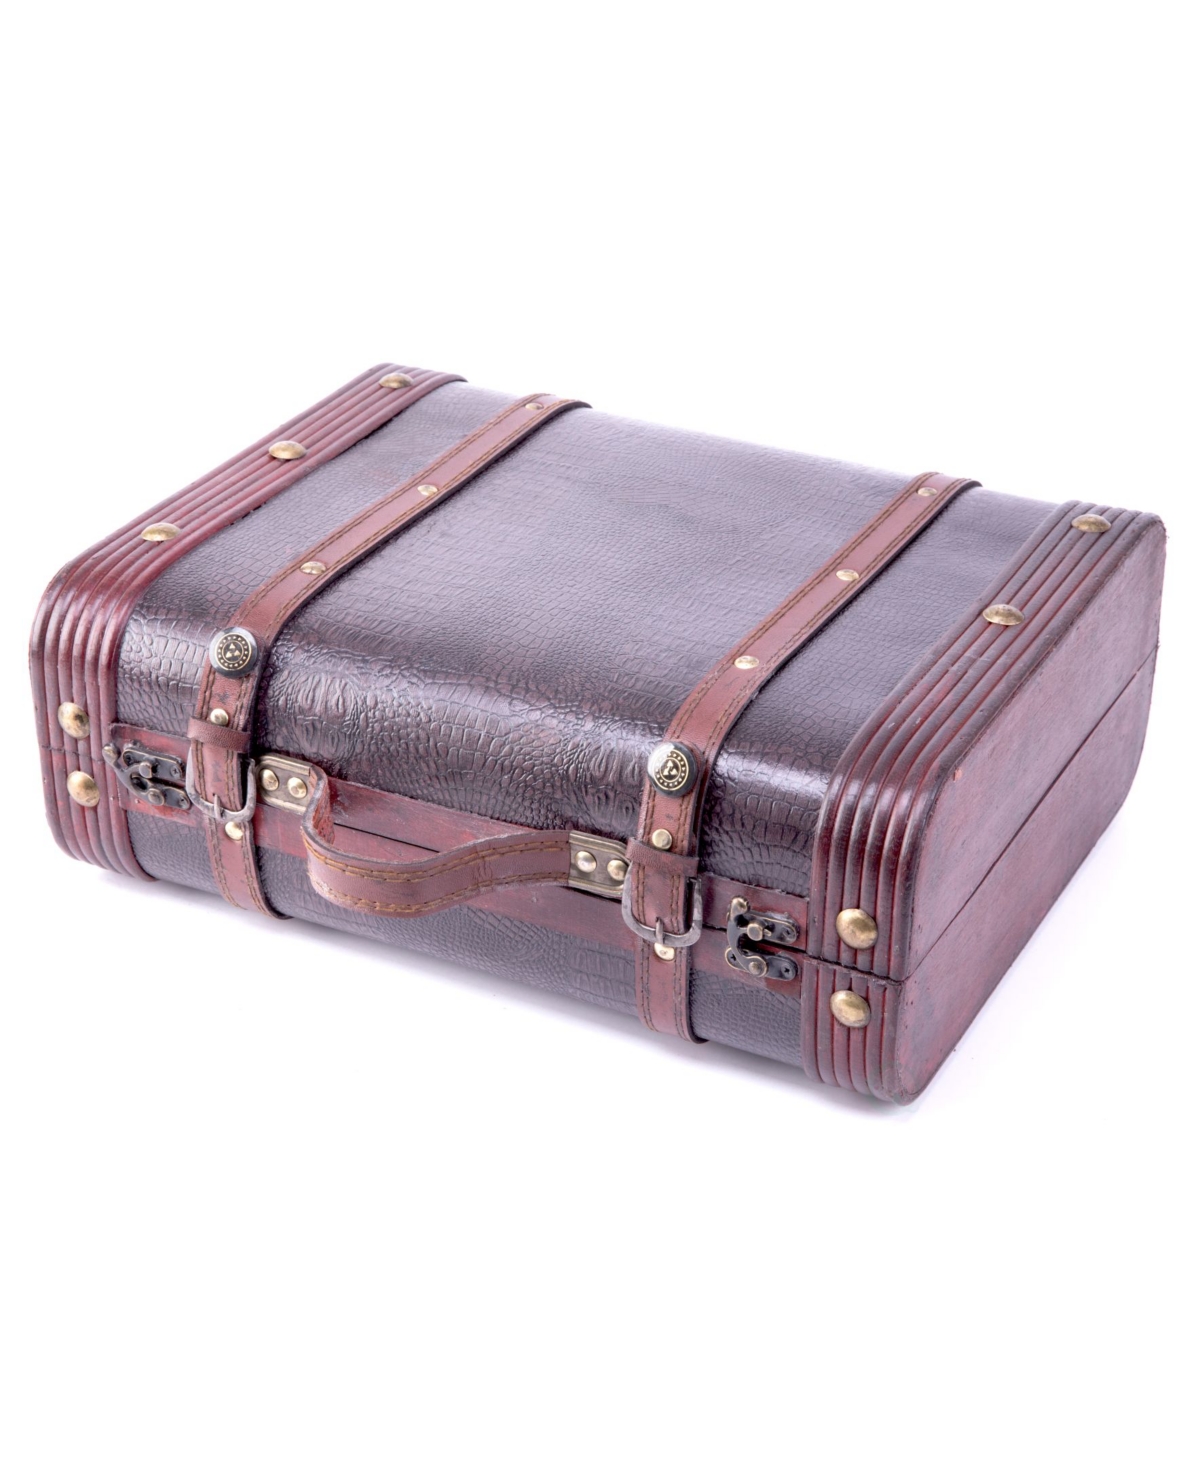 Vintiquewise Decorative Wooden Leather Suitcase In Brown